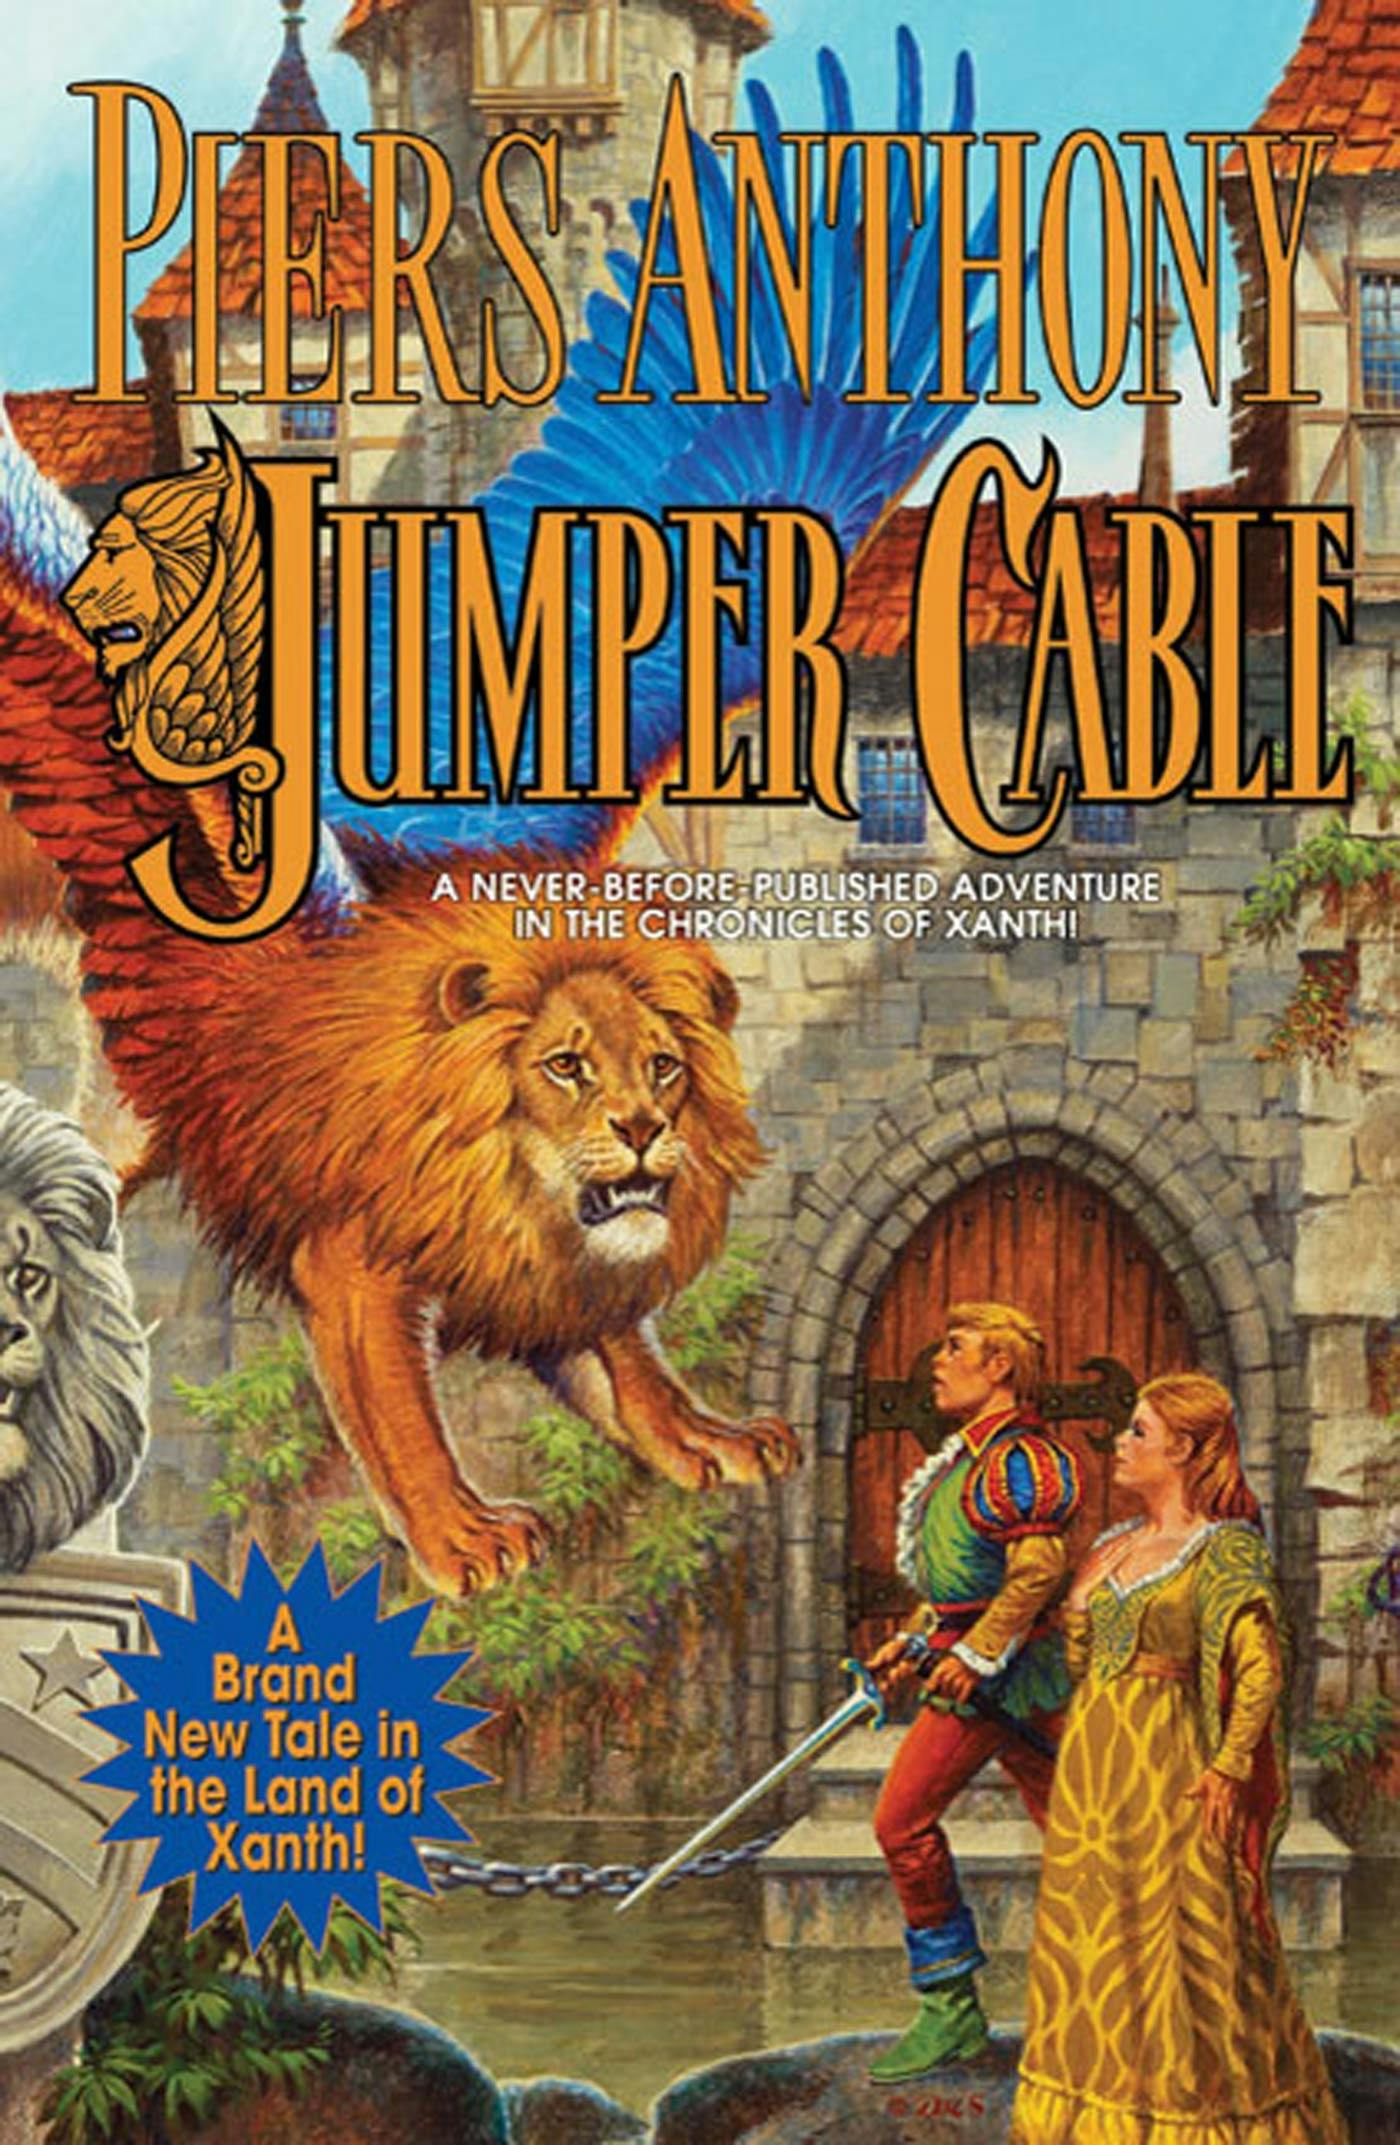 Cover for the book titled as: Jumper Cable